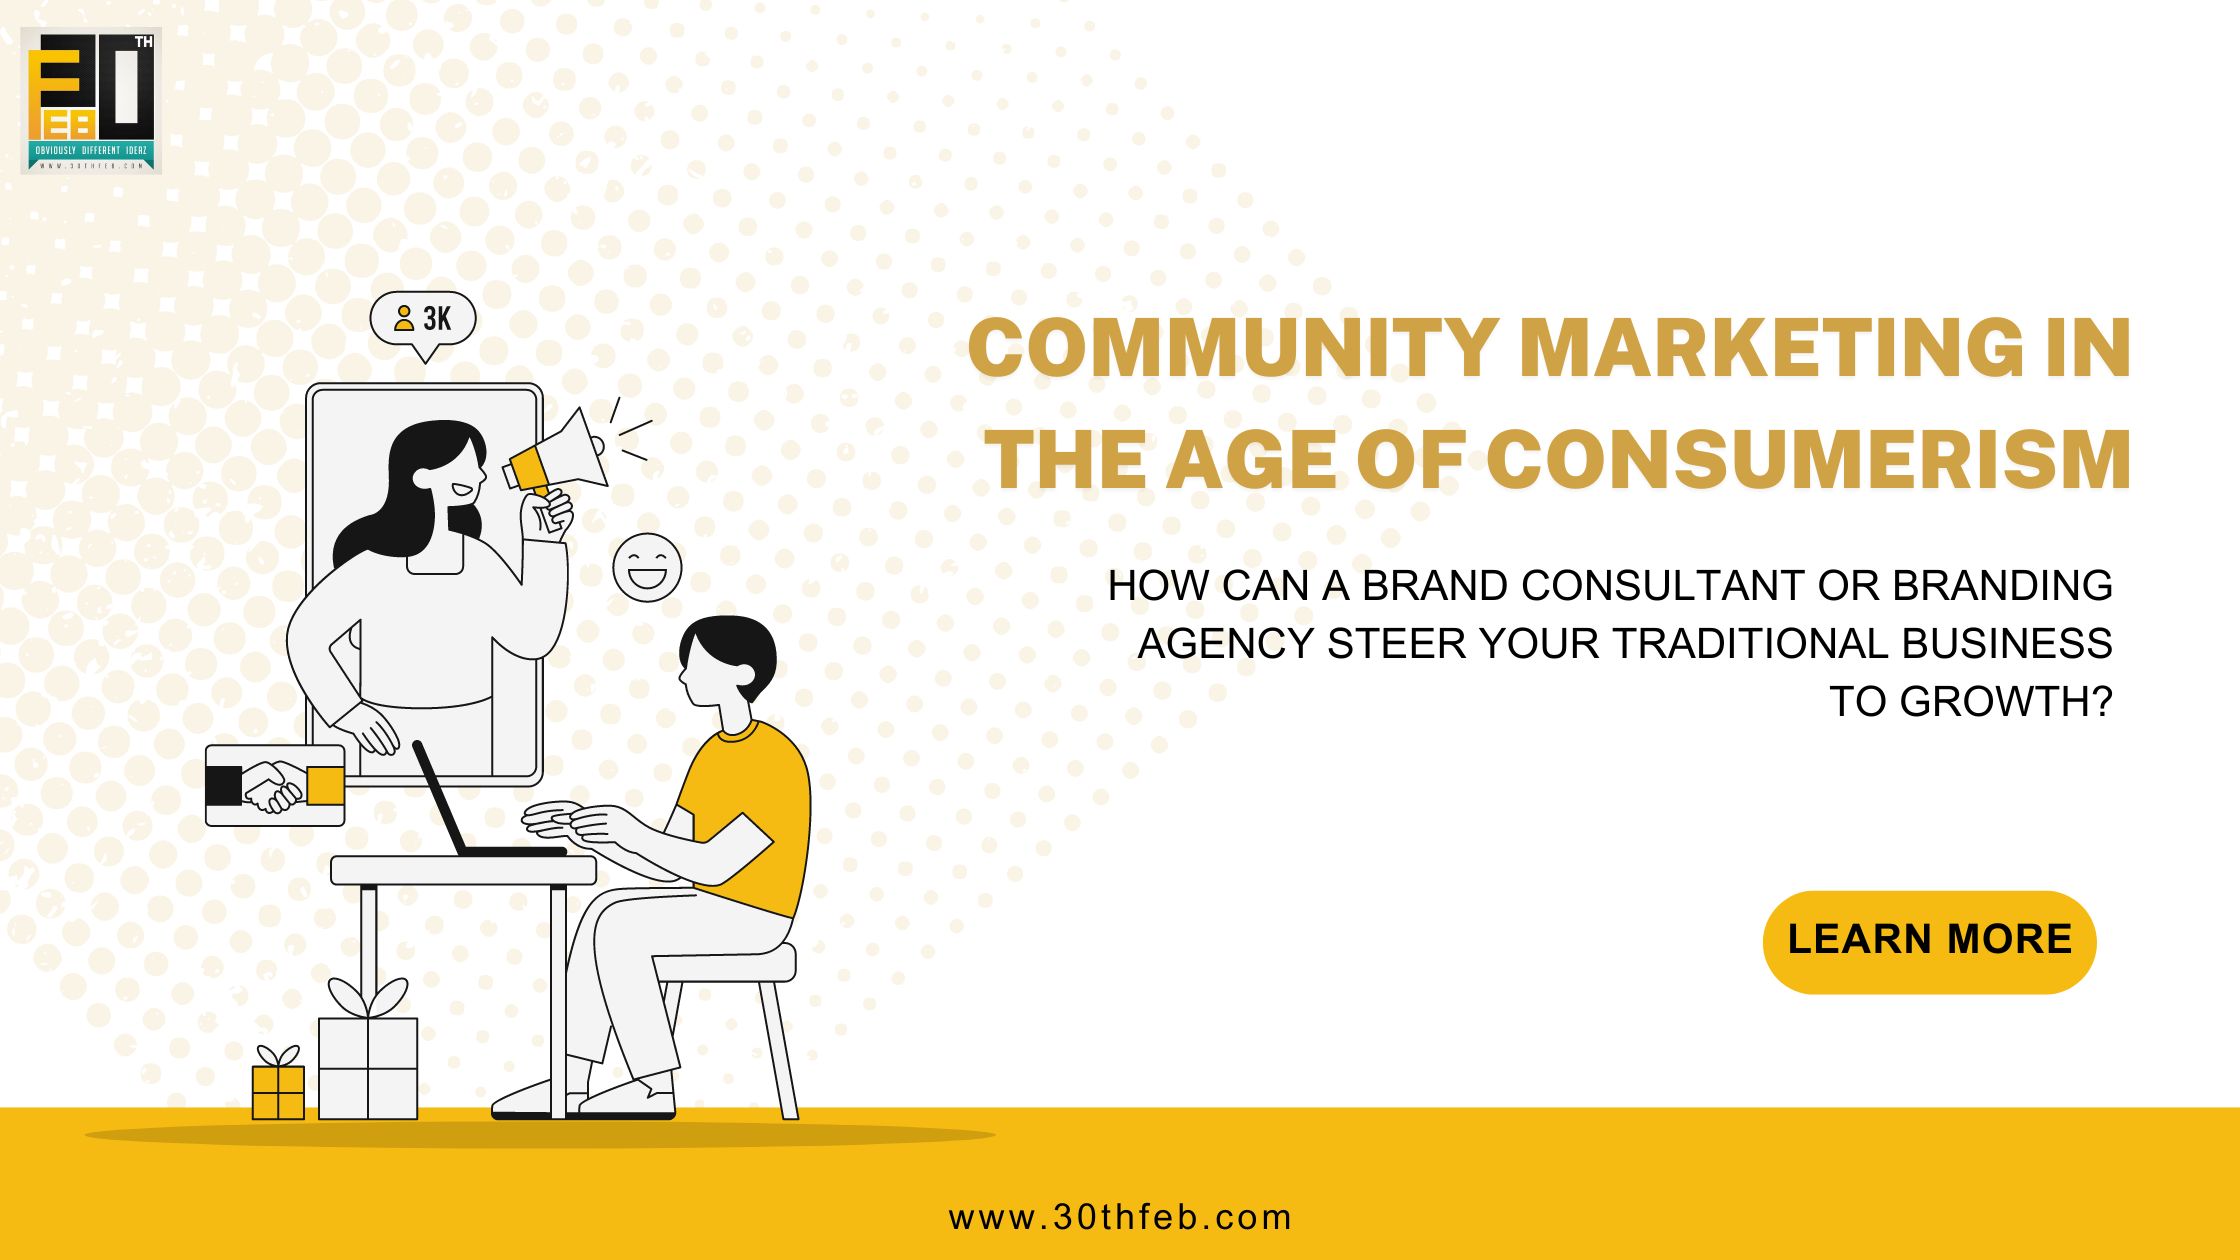 Community Marketing in the Age of Consumerism. How can a brand consultant or branding agency steer your traditional business to growth?